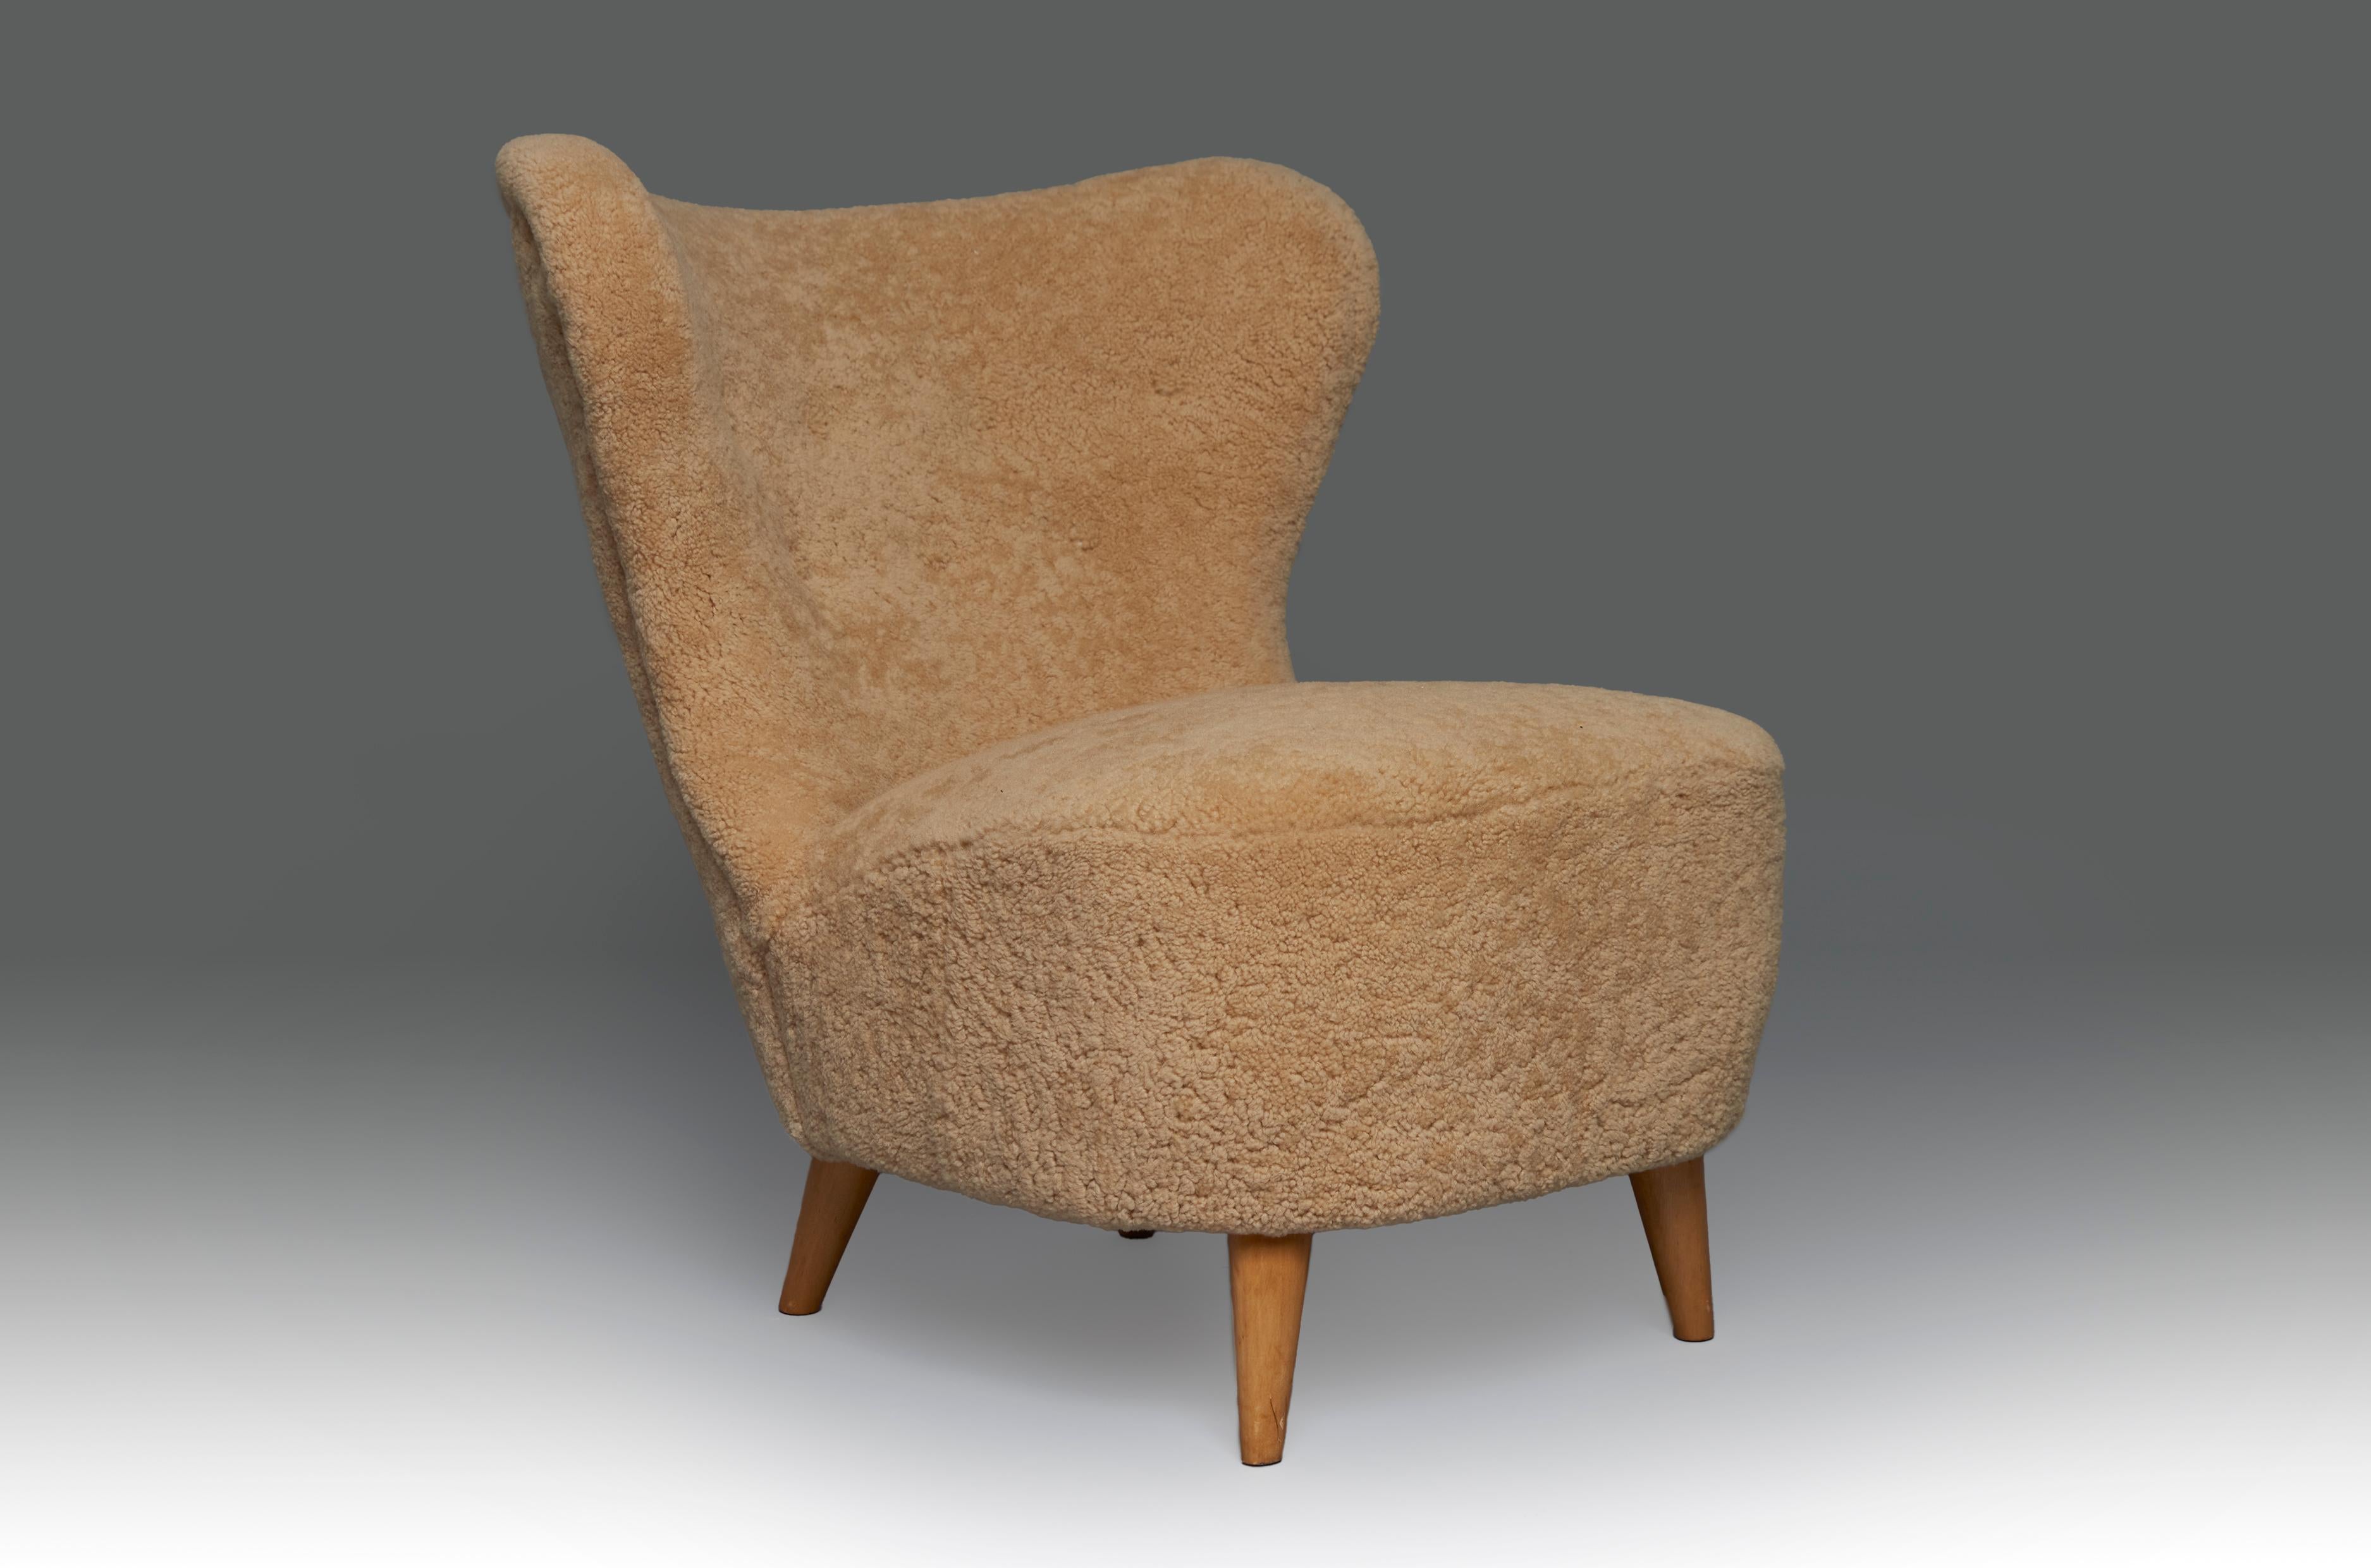 Easy chair in birch and natural sheepkin by anonymous designer, clean and simple yet modern design. Magnificent restored condition and newly ulpholstered.
 